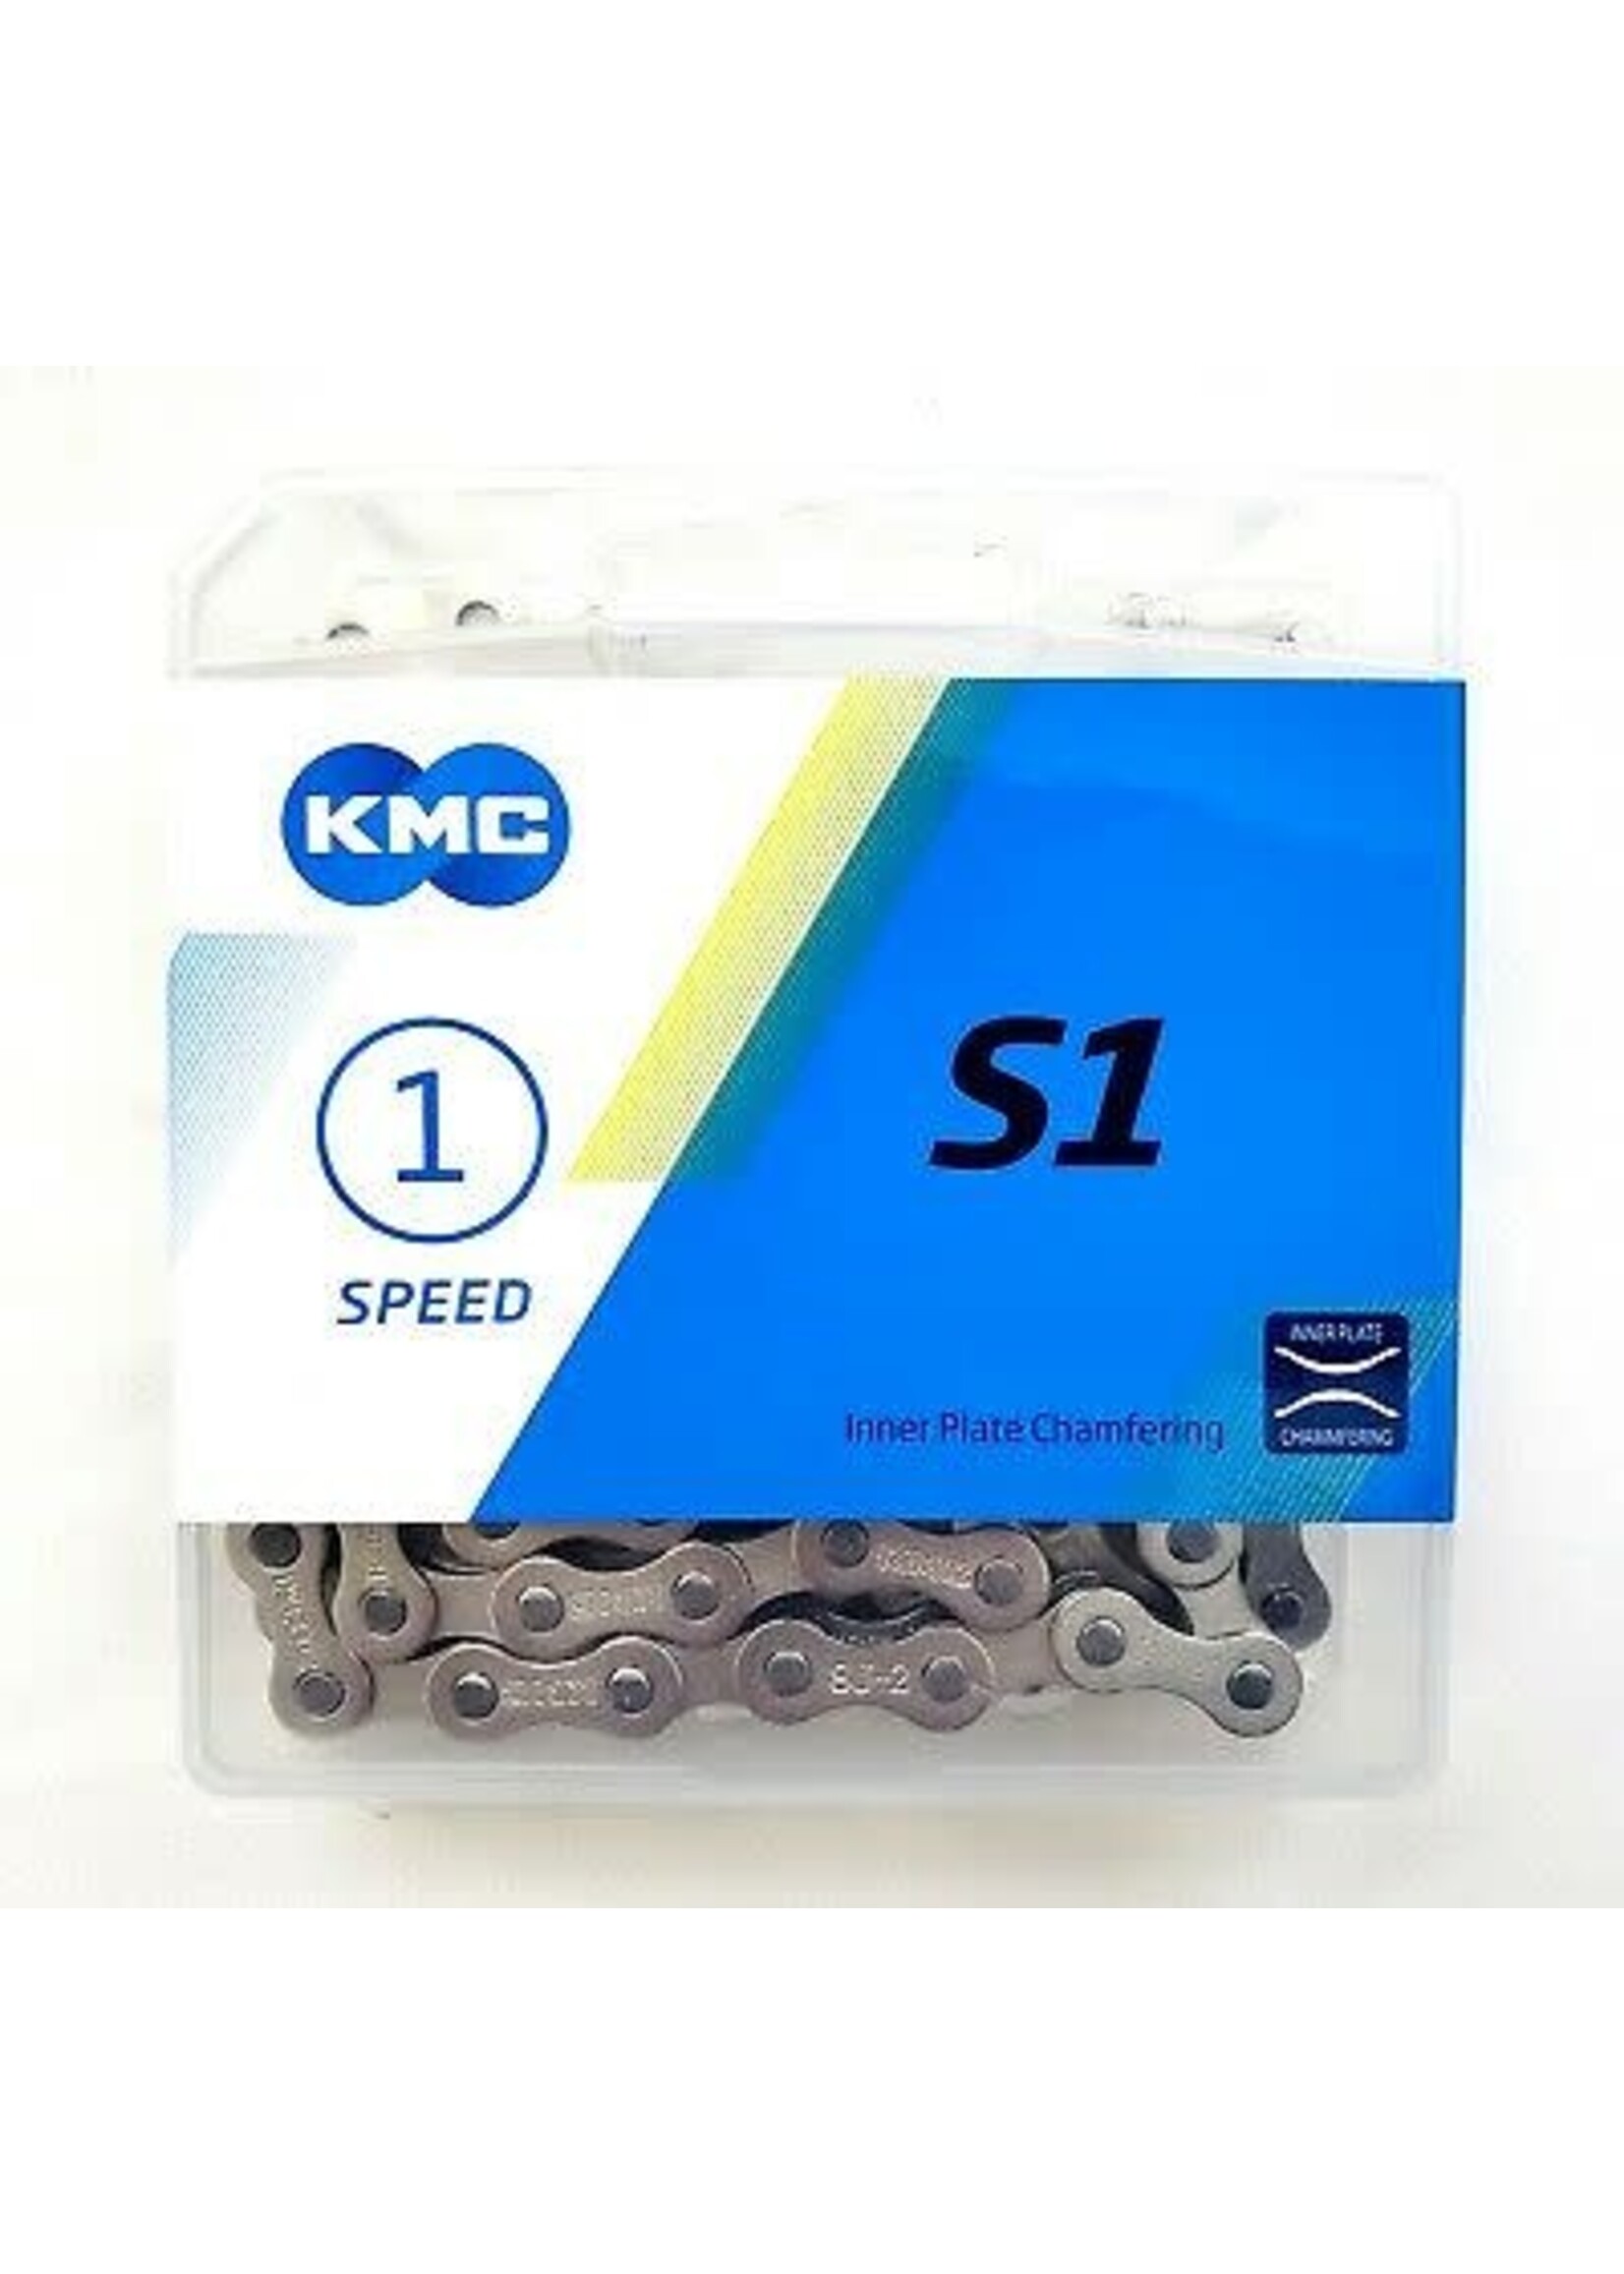 KMC S1 1/2x1/8" 112 LINK 8.6mm SINGLE SPEED CHAIN SILVER